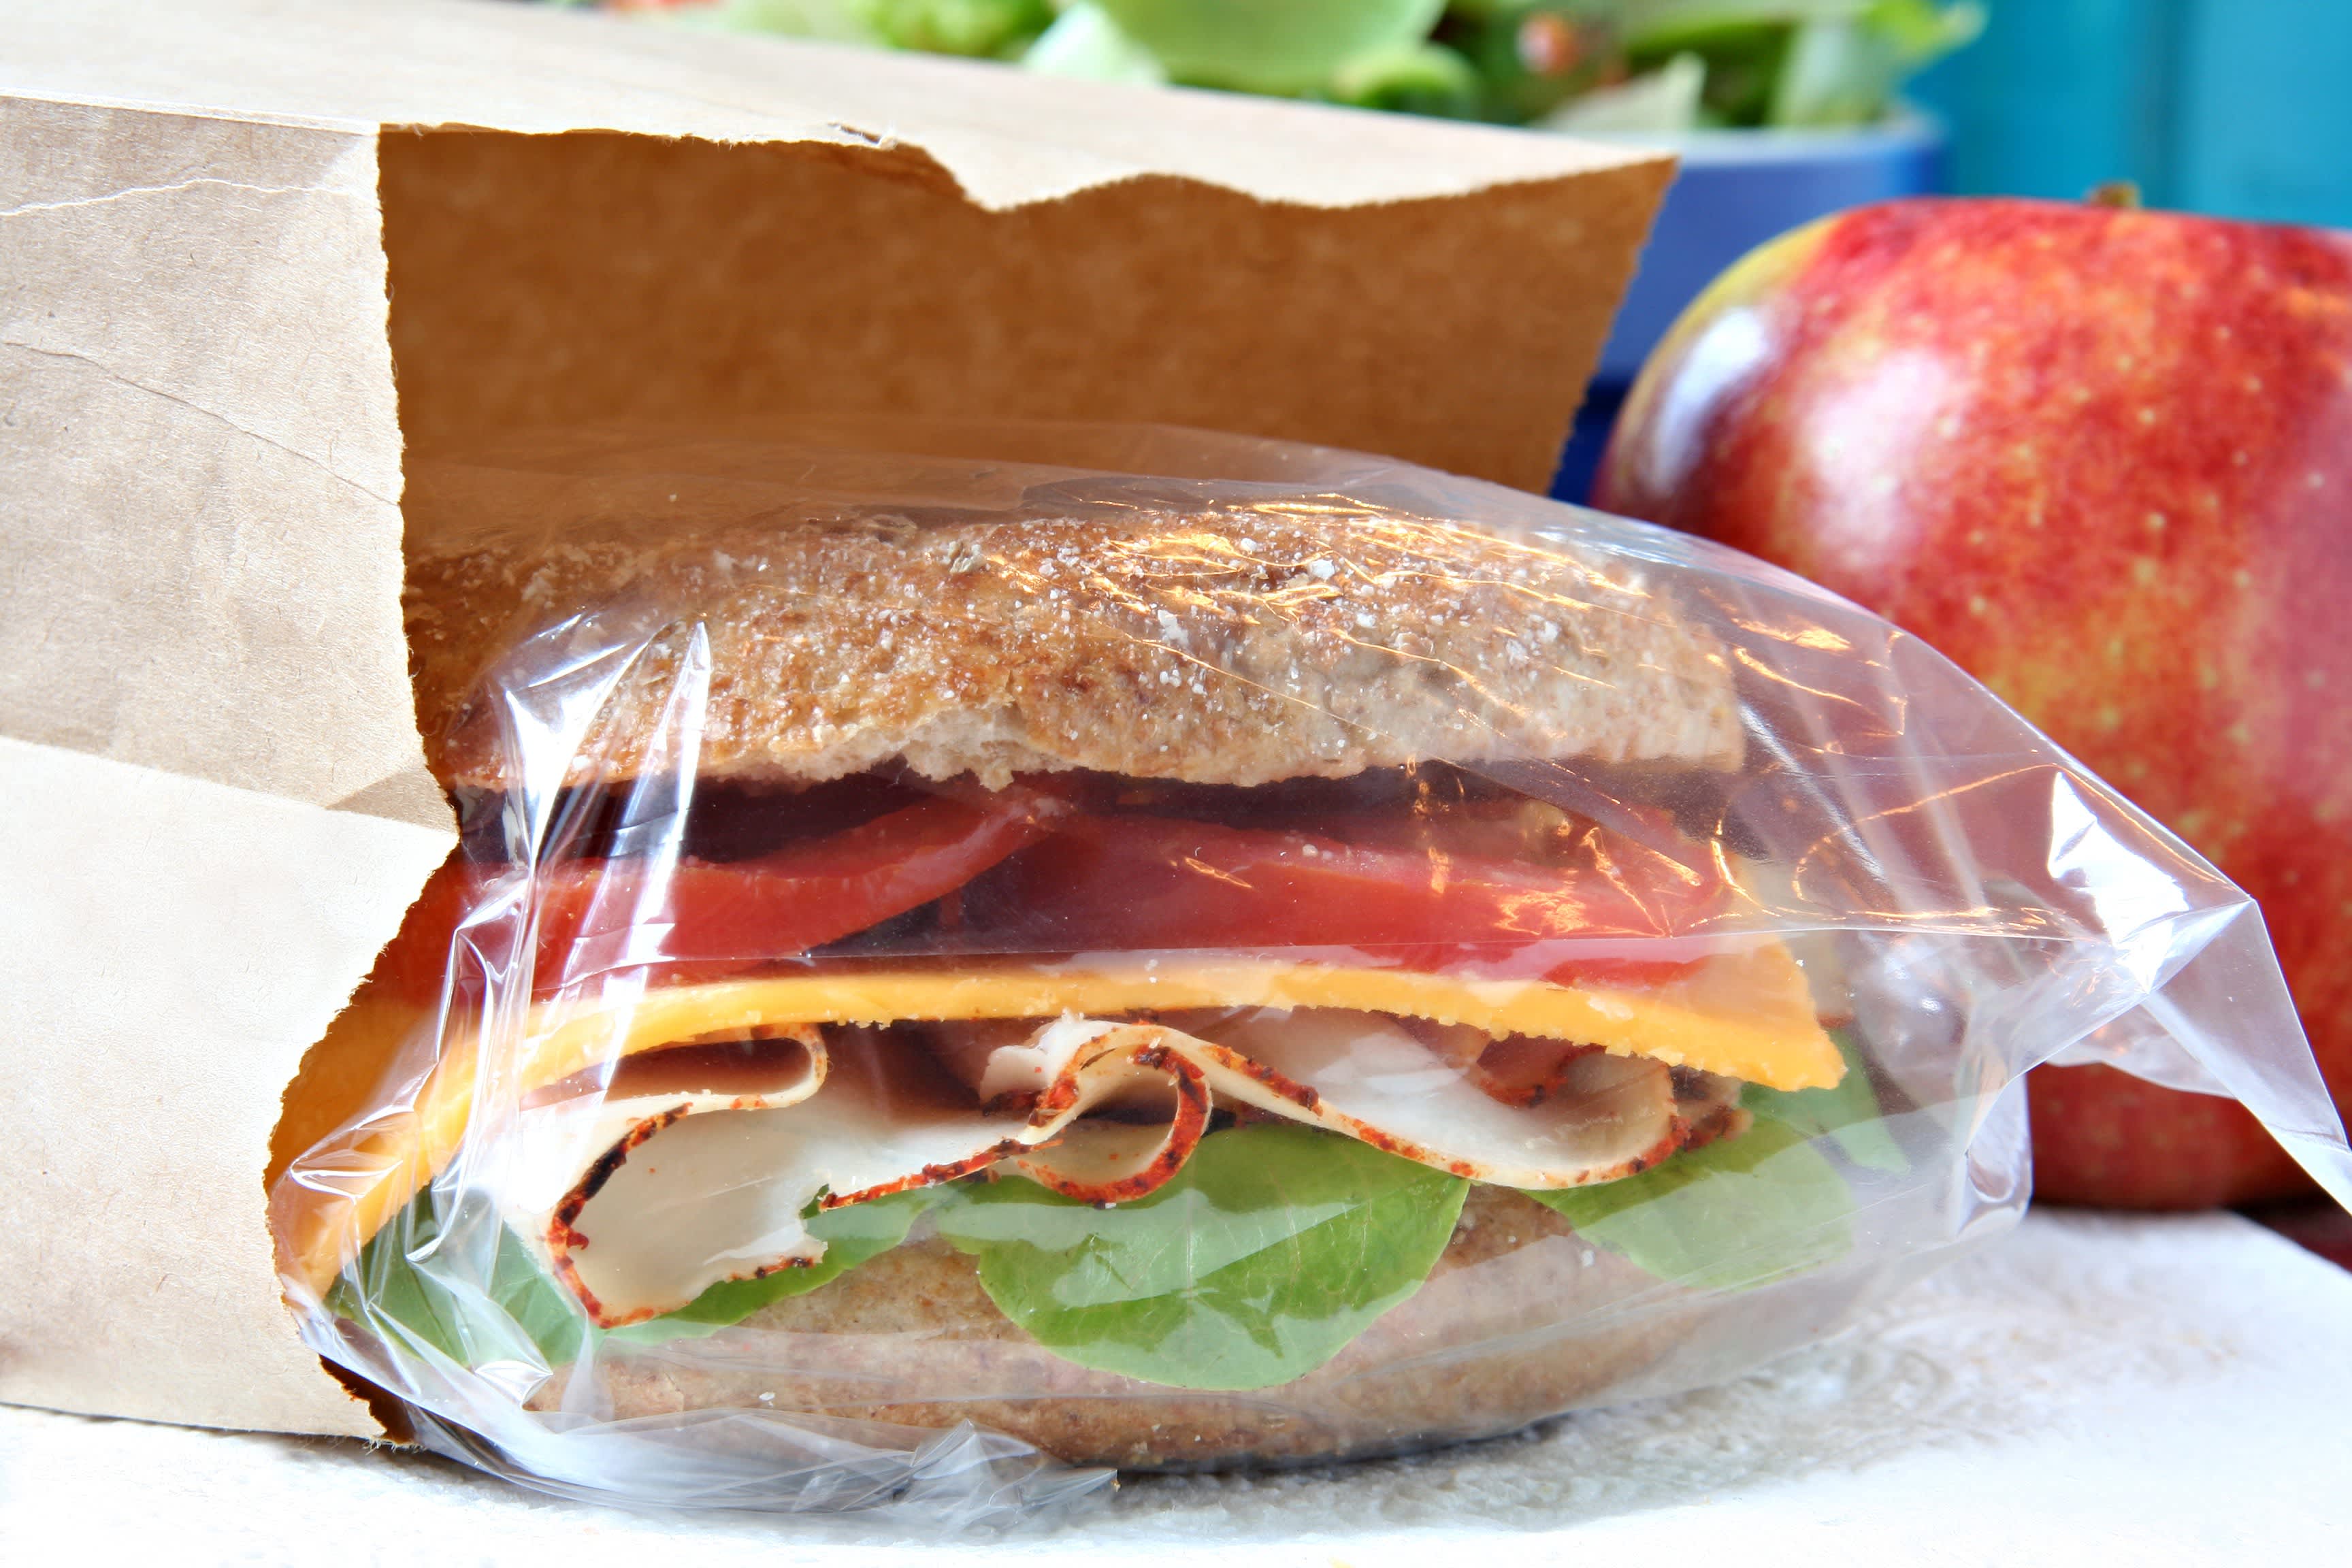 How To Keep Sandwiches From Drying Out - Considerationhire Doralutz